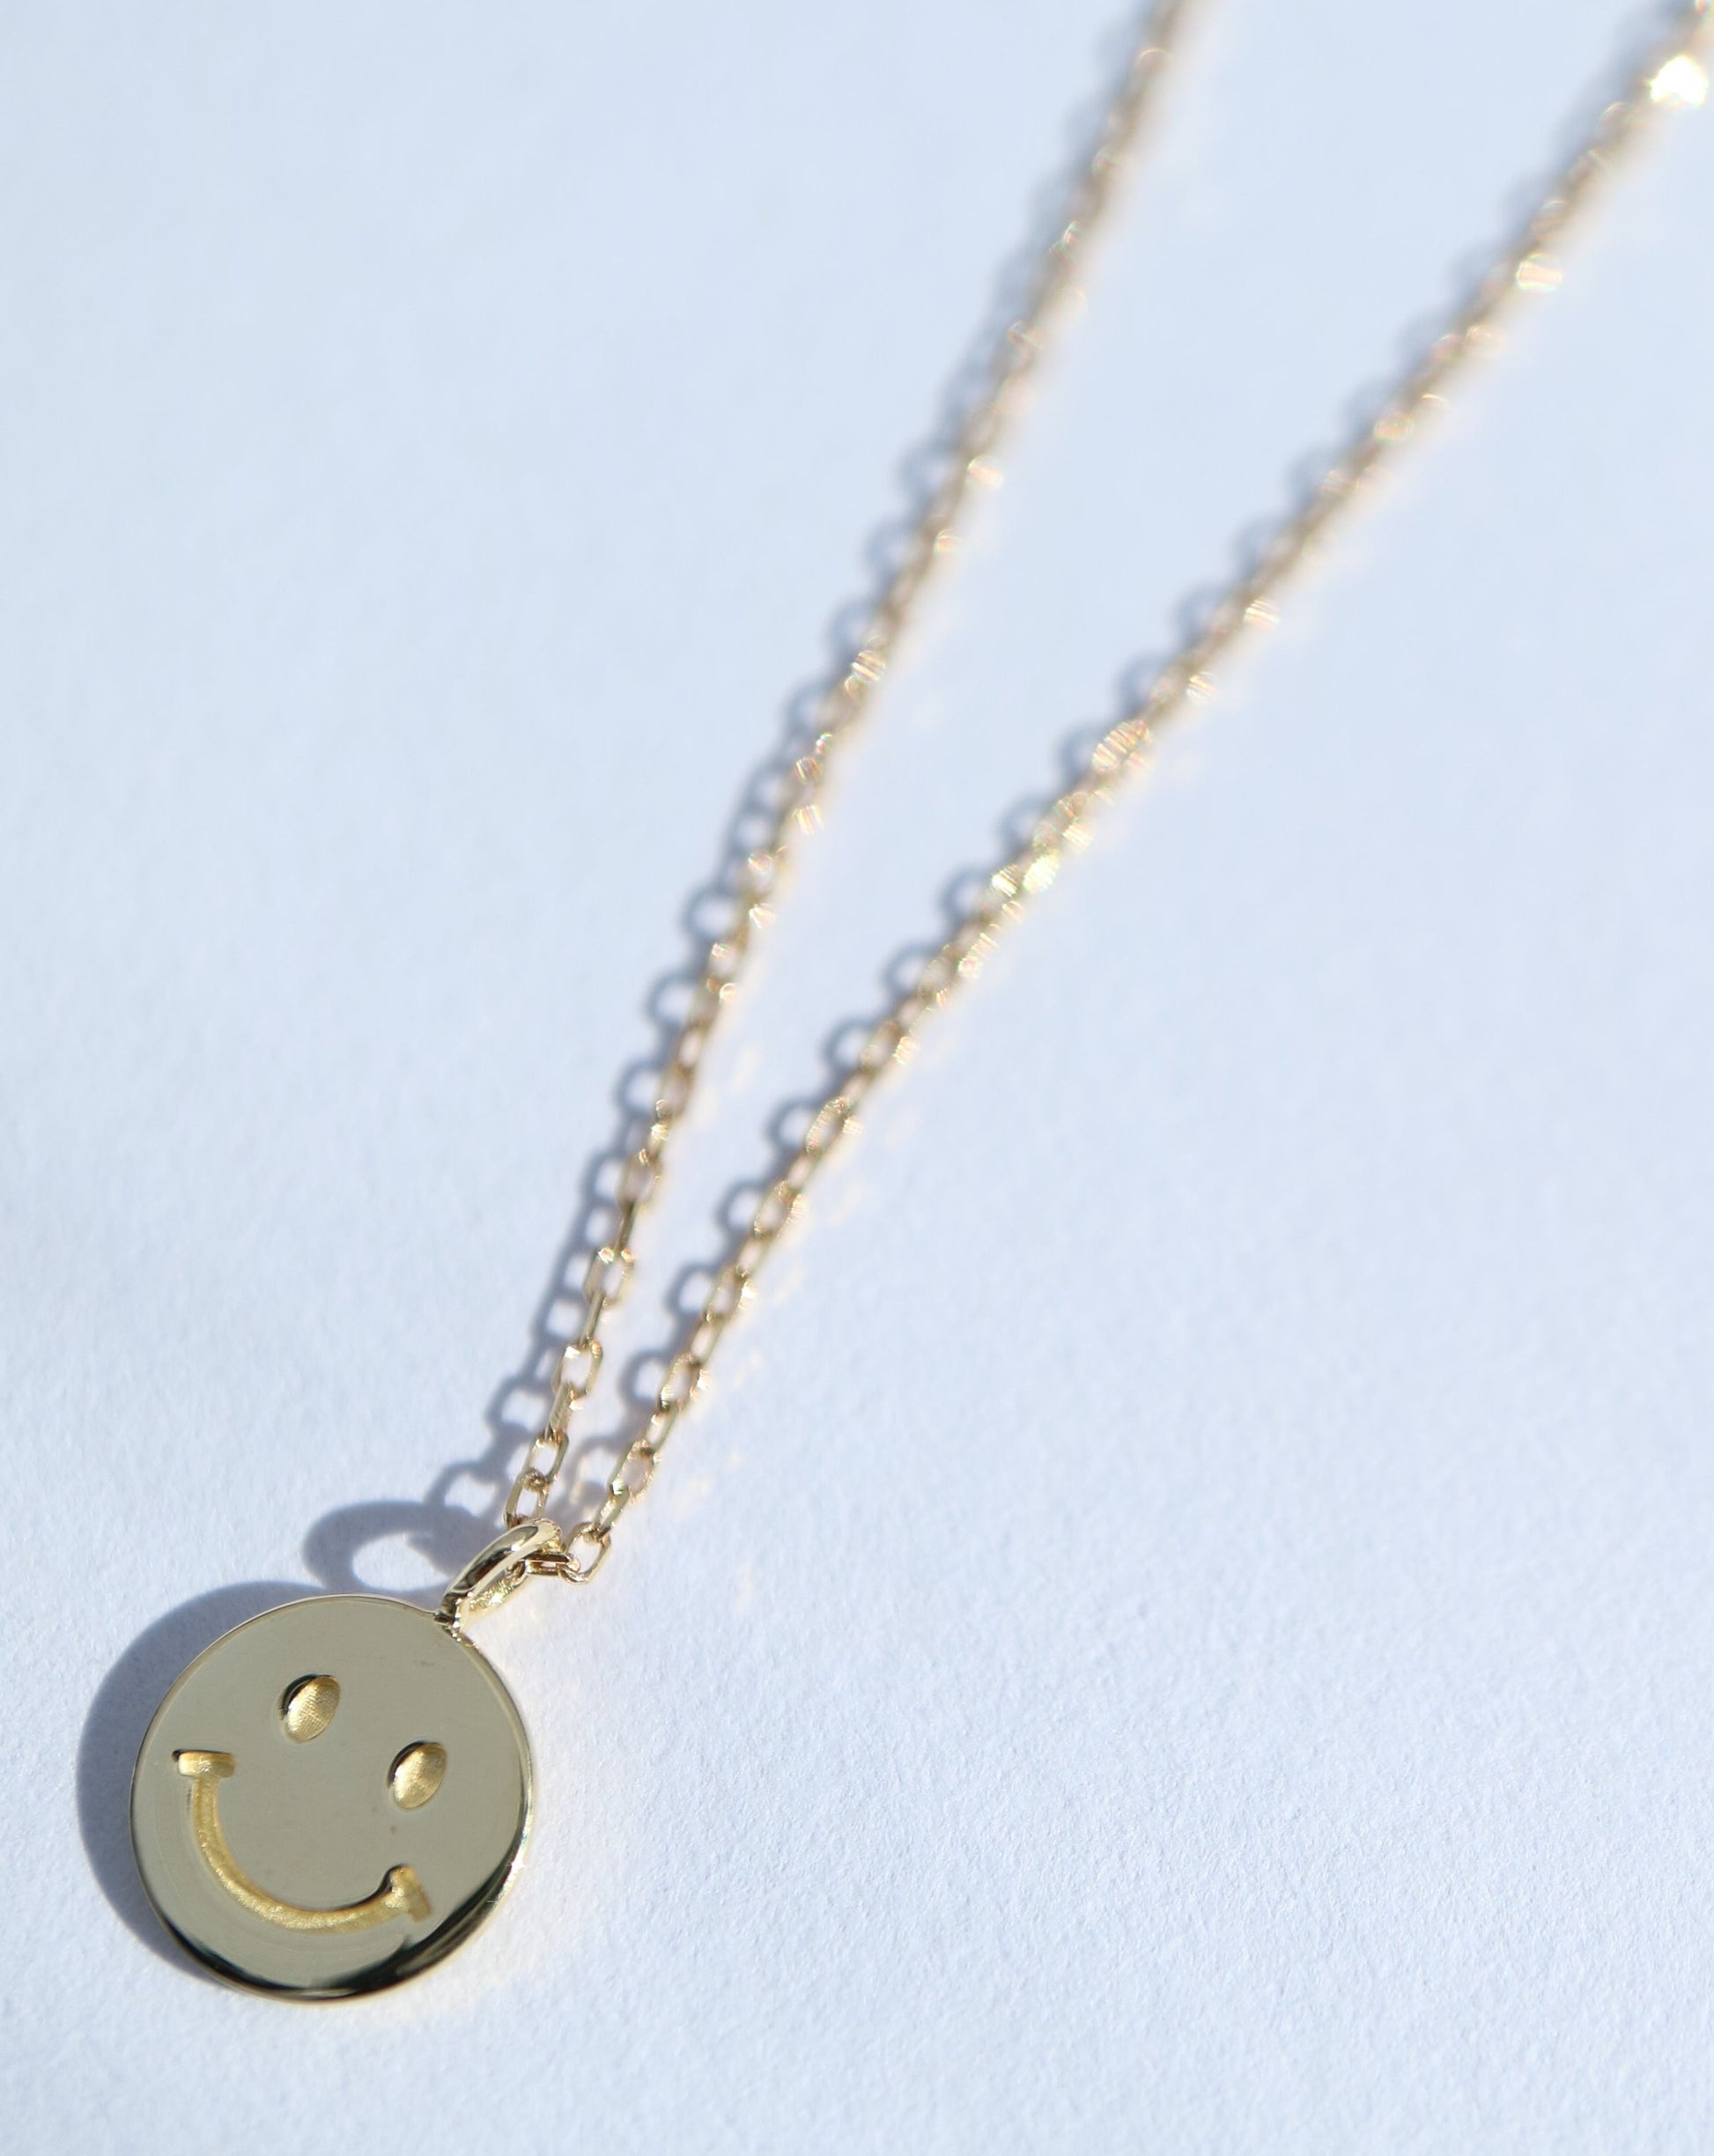 9kt gold necklace with smiley face pendant